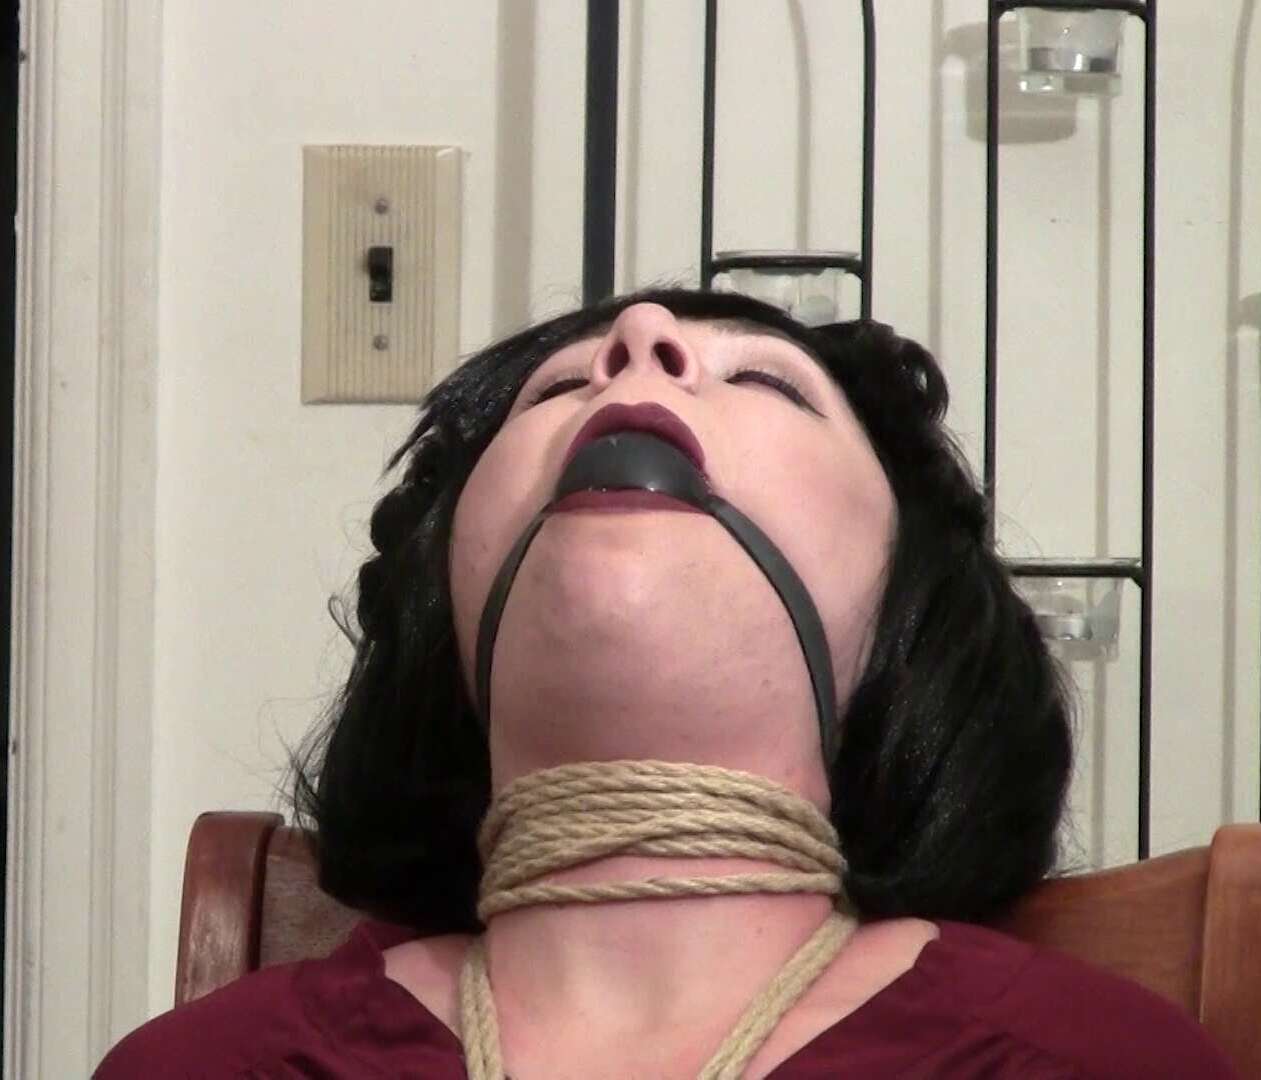 Megan tries to get loose from her chair tie - Rope Bondage